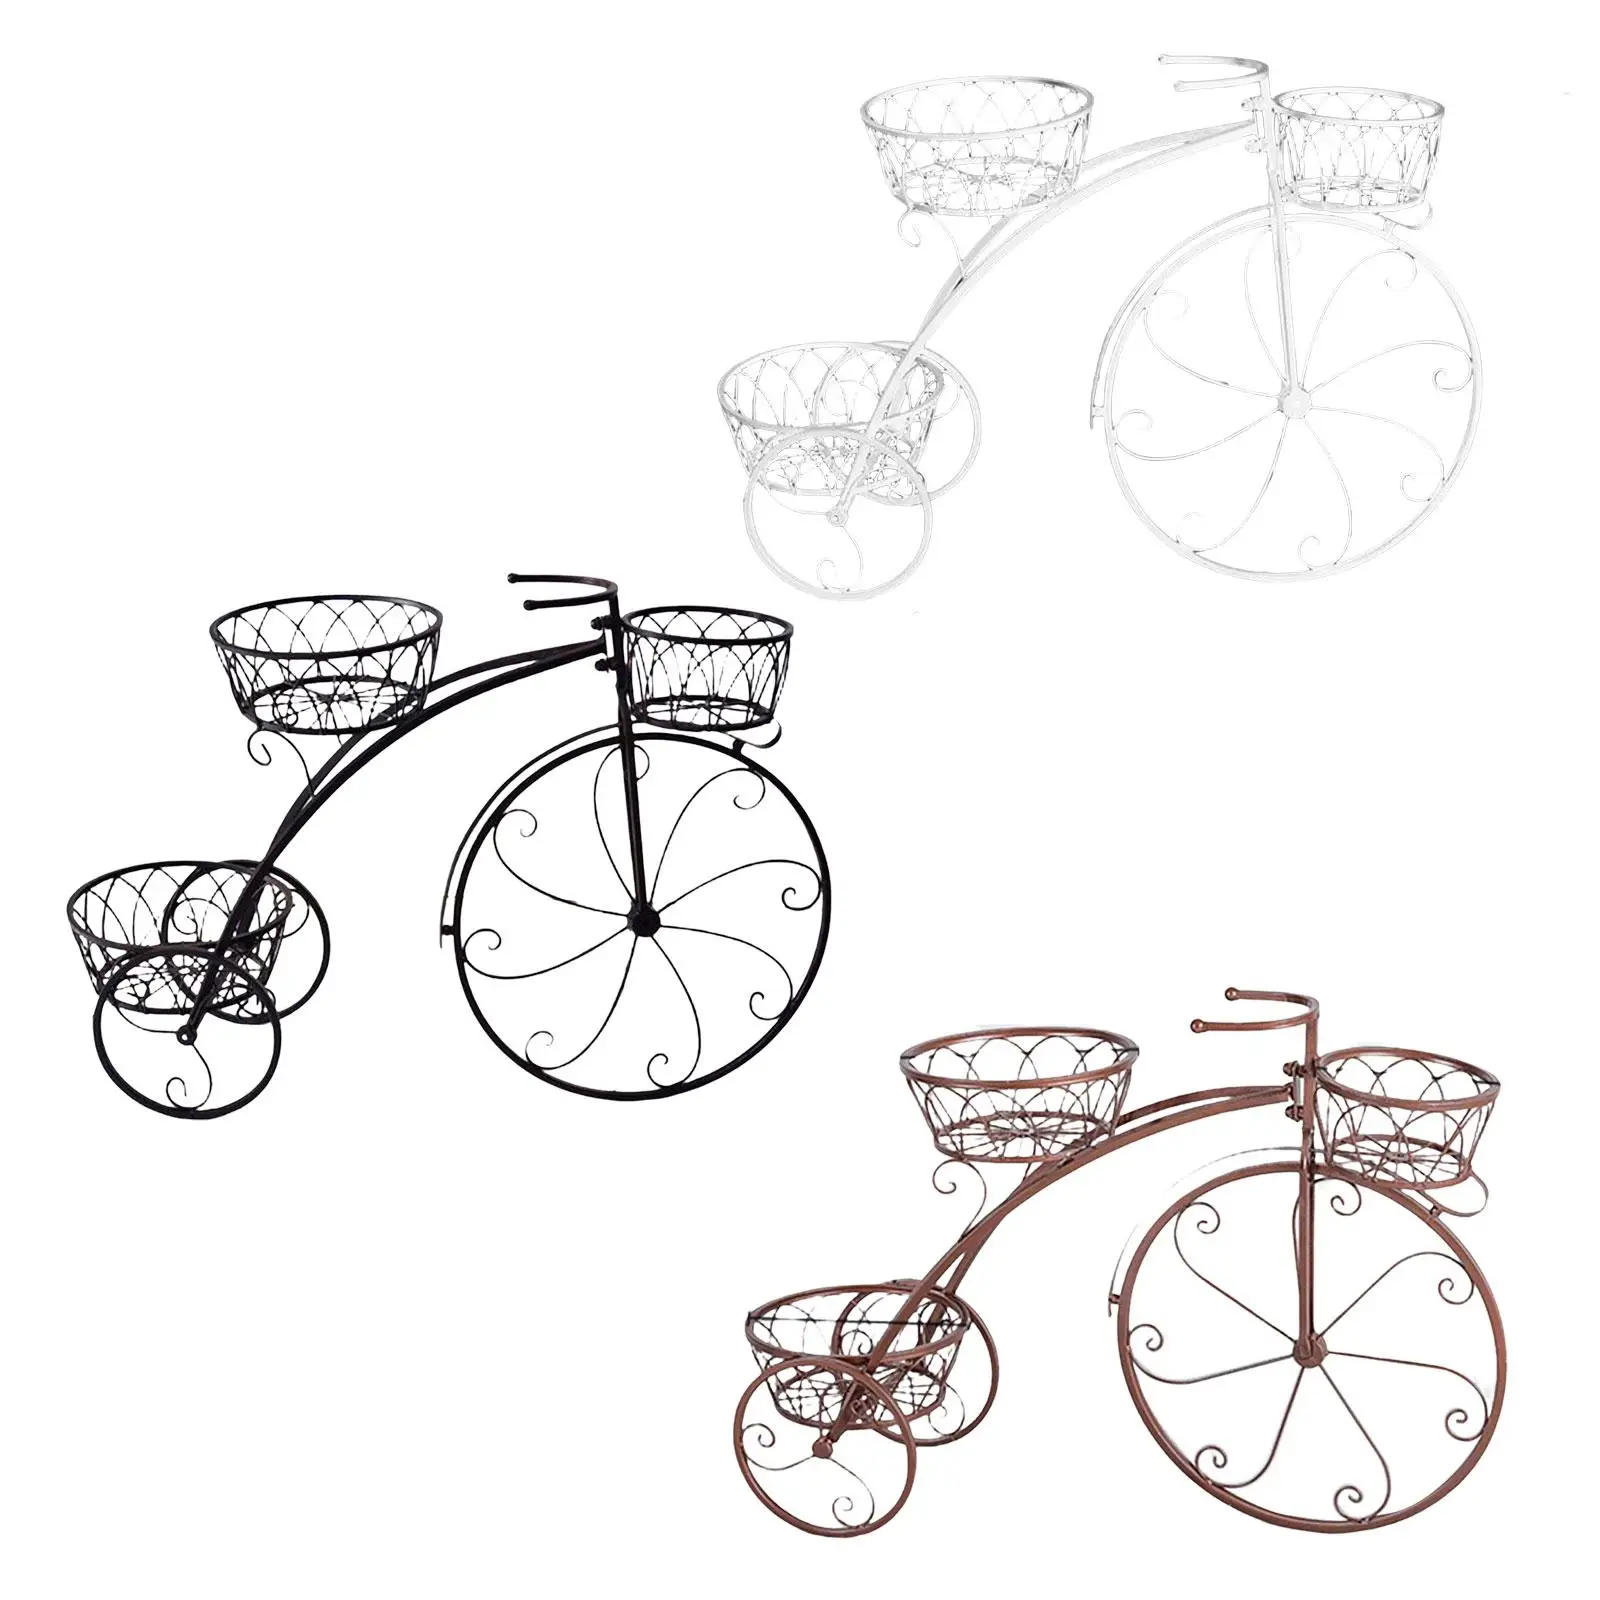 Creative Bicycle Flower Basket Bookshelf Multipurpose Decorative Storage Shelf Unique Bicycle Plant Stand for Living Room Home